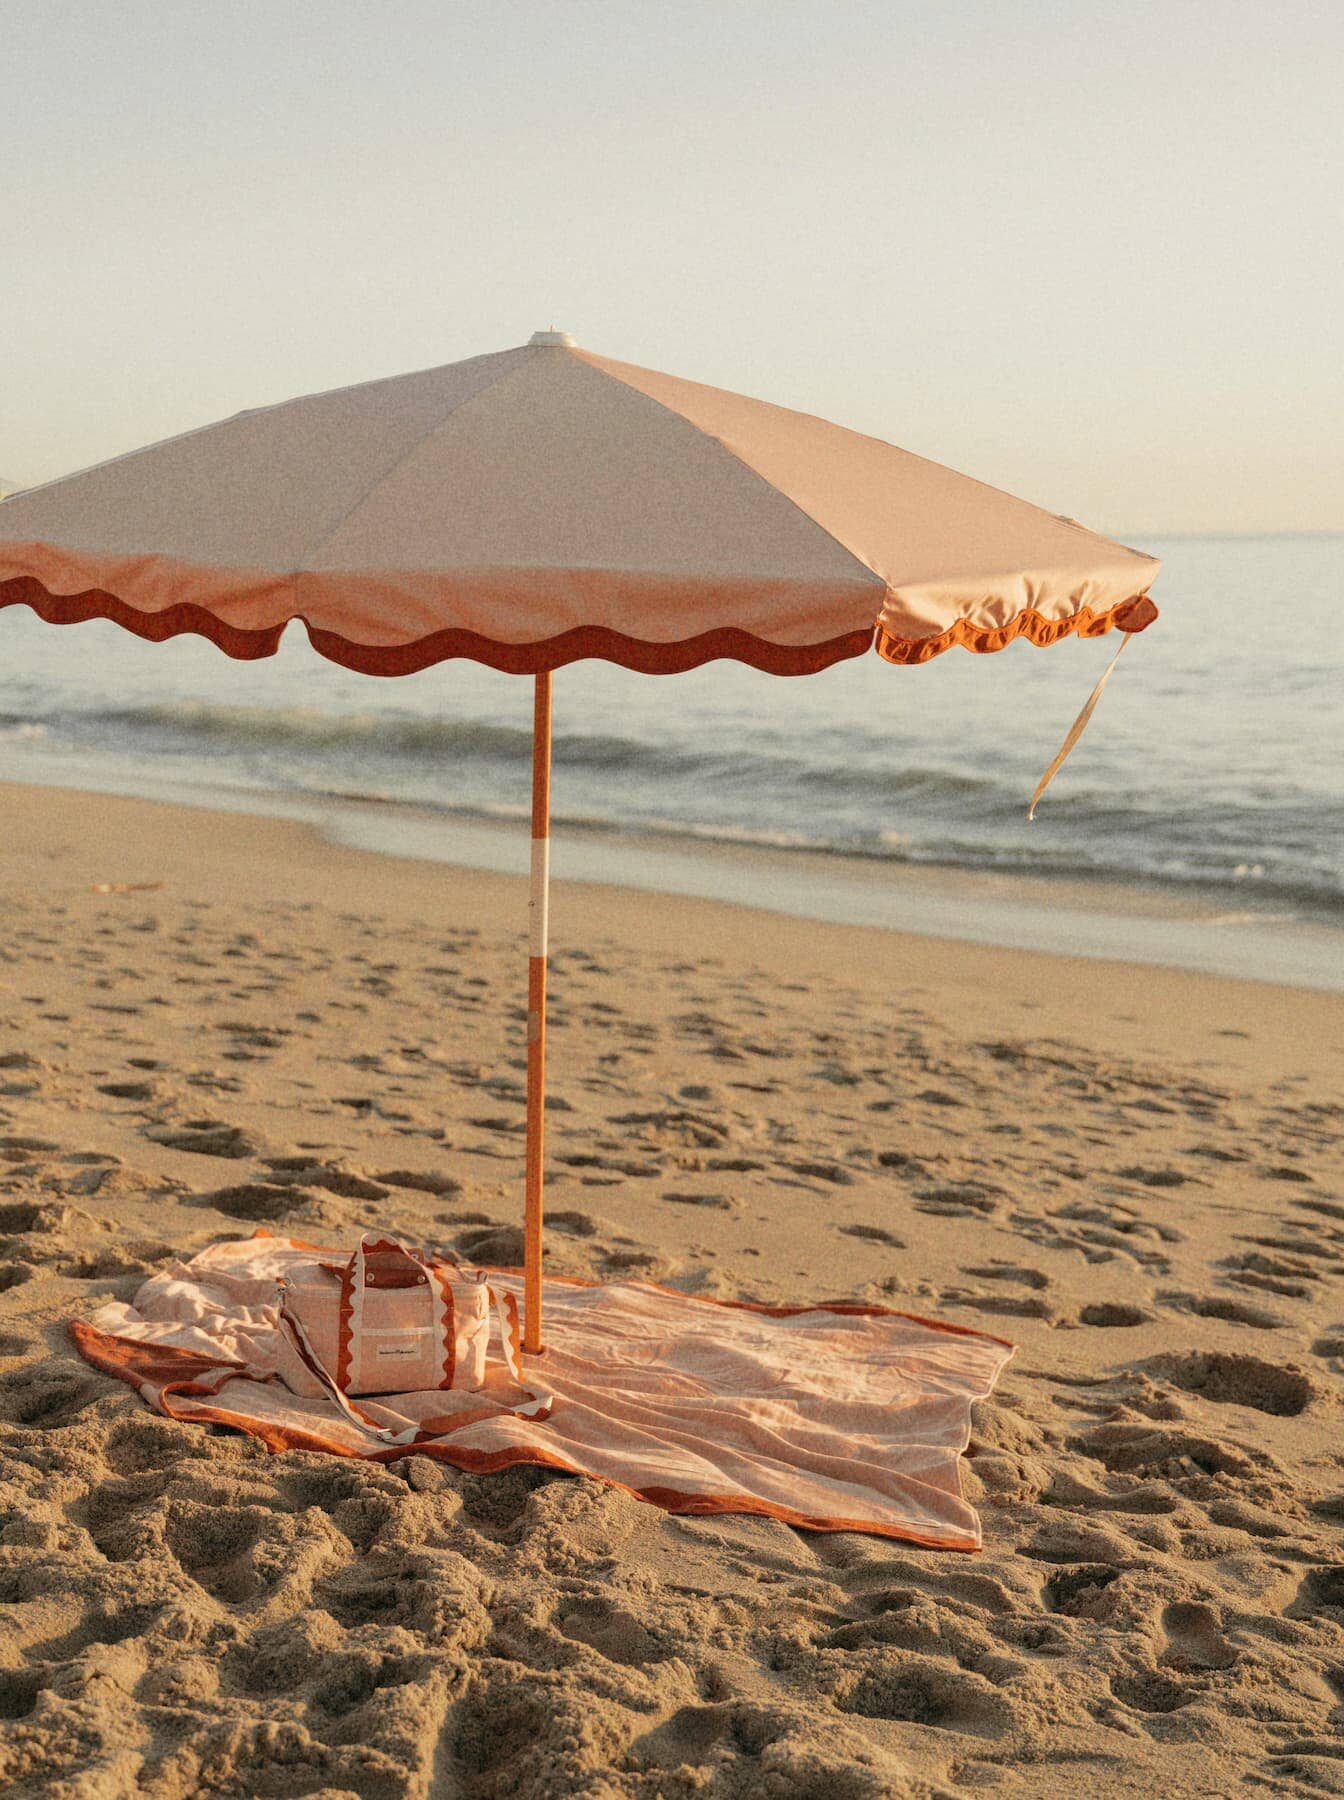 riviera pink blanket, umbrella and cooler on the beach